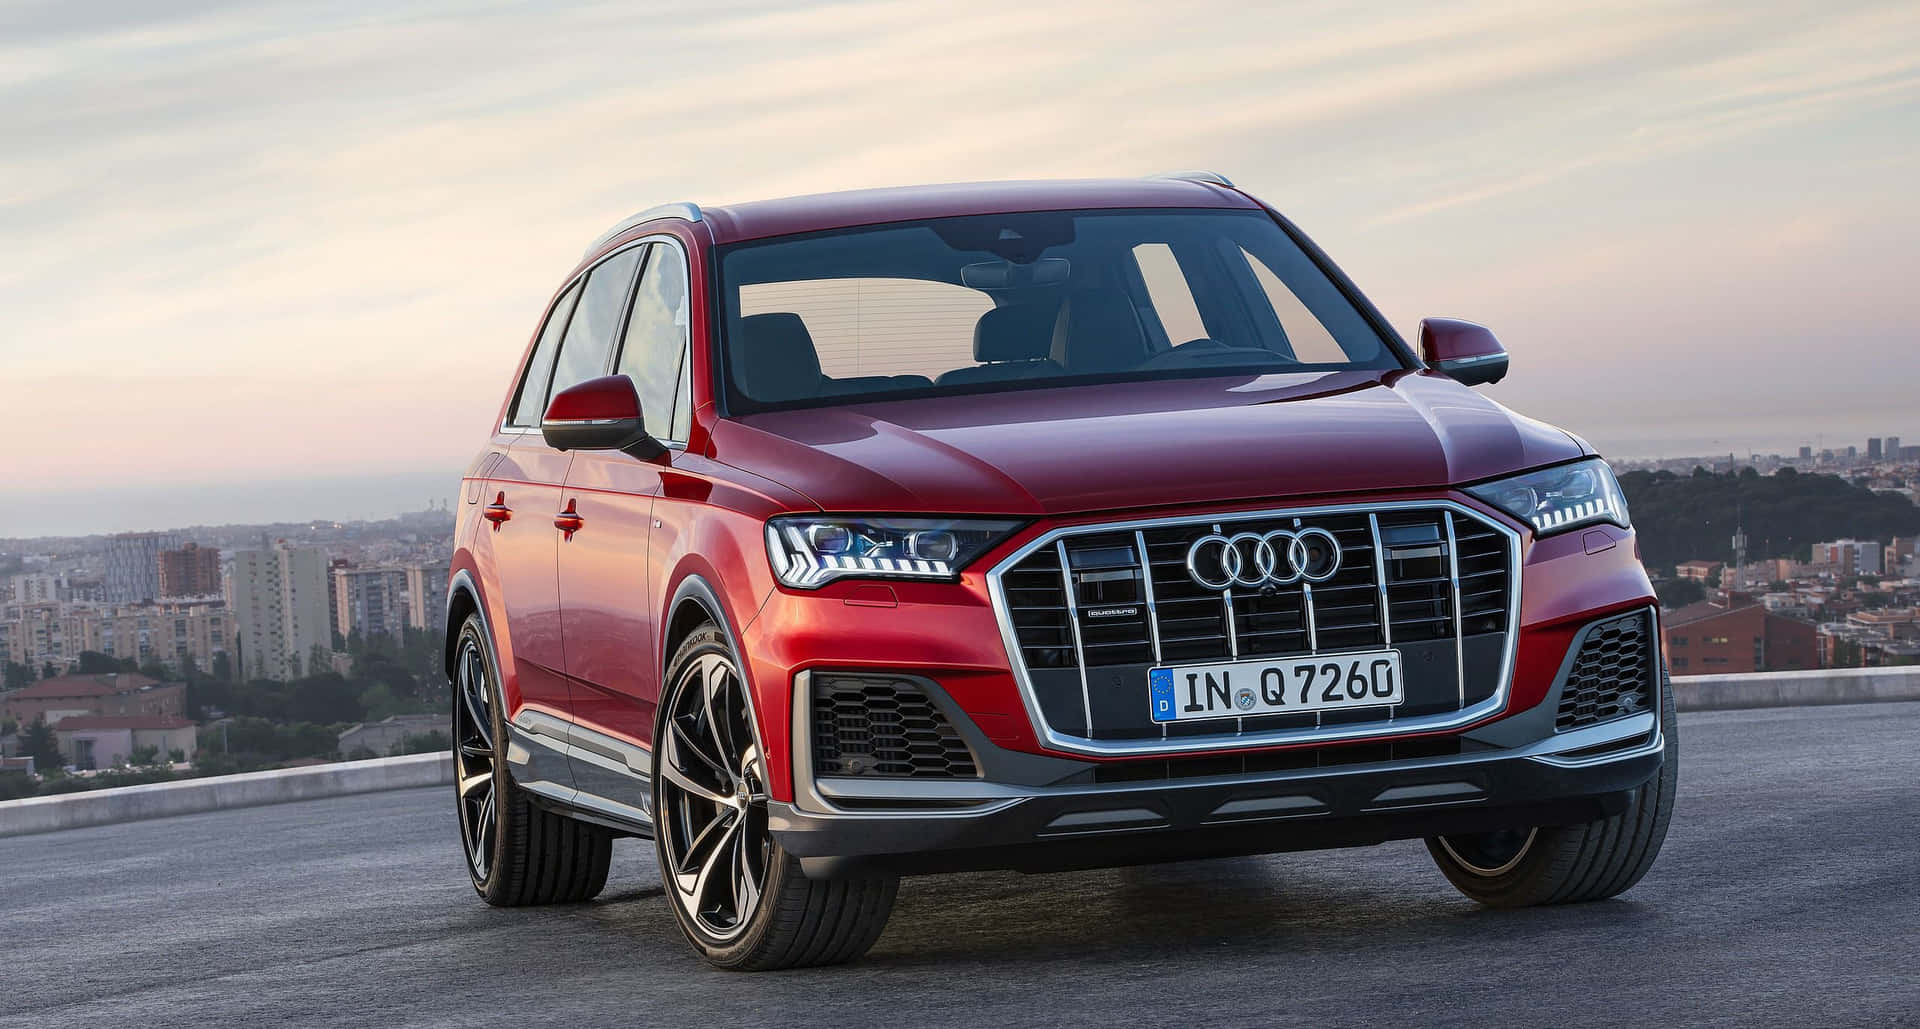 Captivating Audi Q7: A Perfect Blend of Elegance and Performance Wallpaper